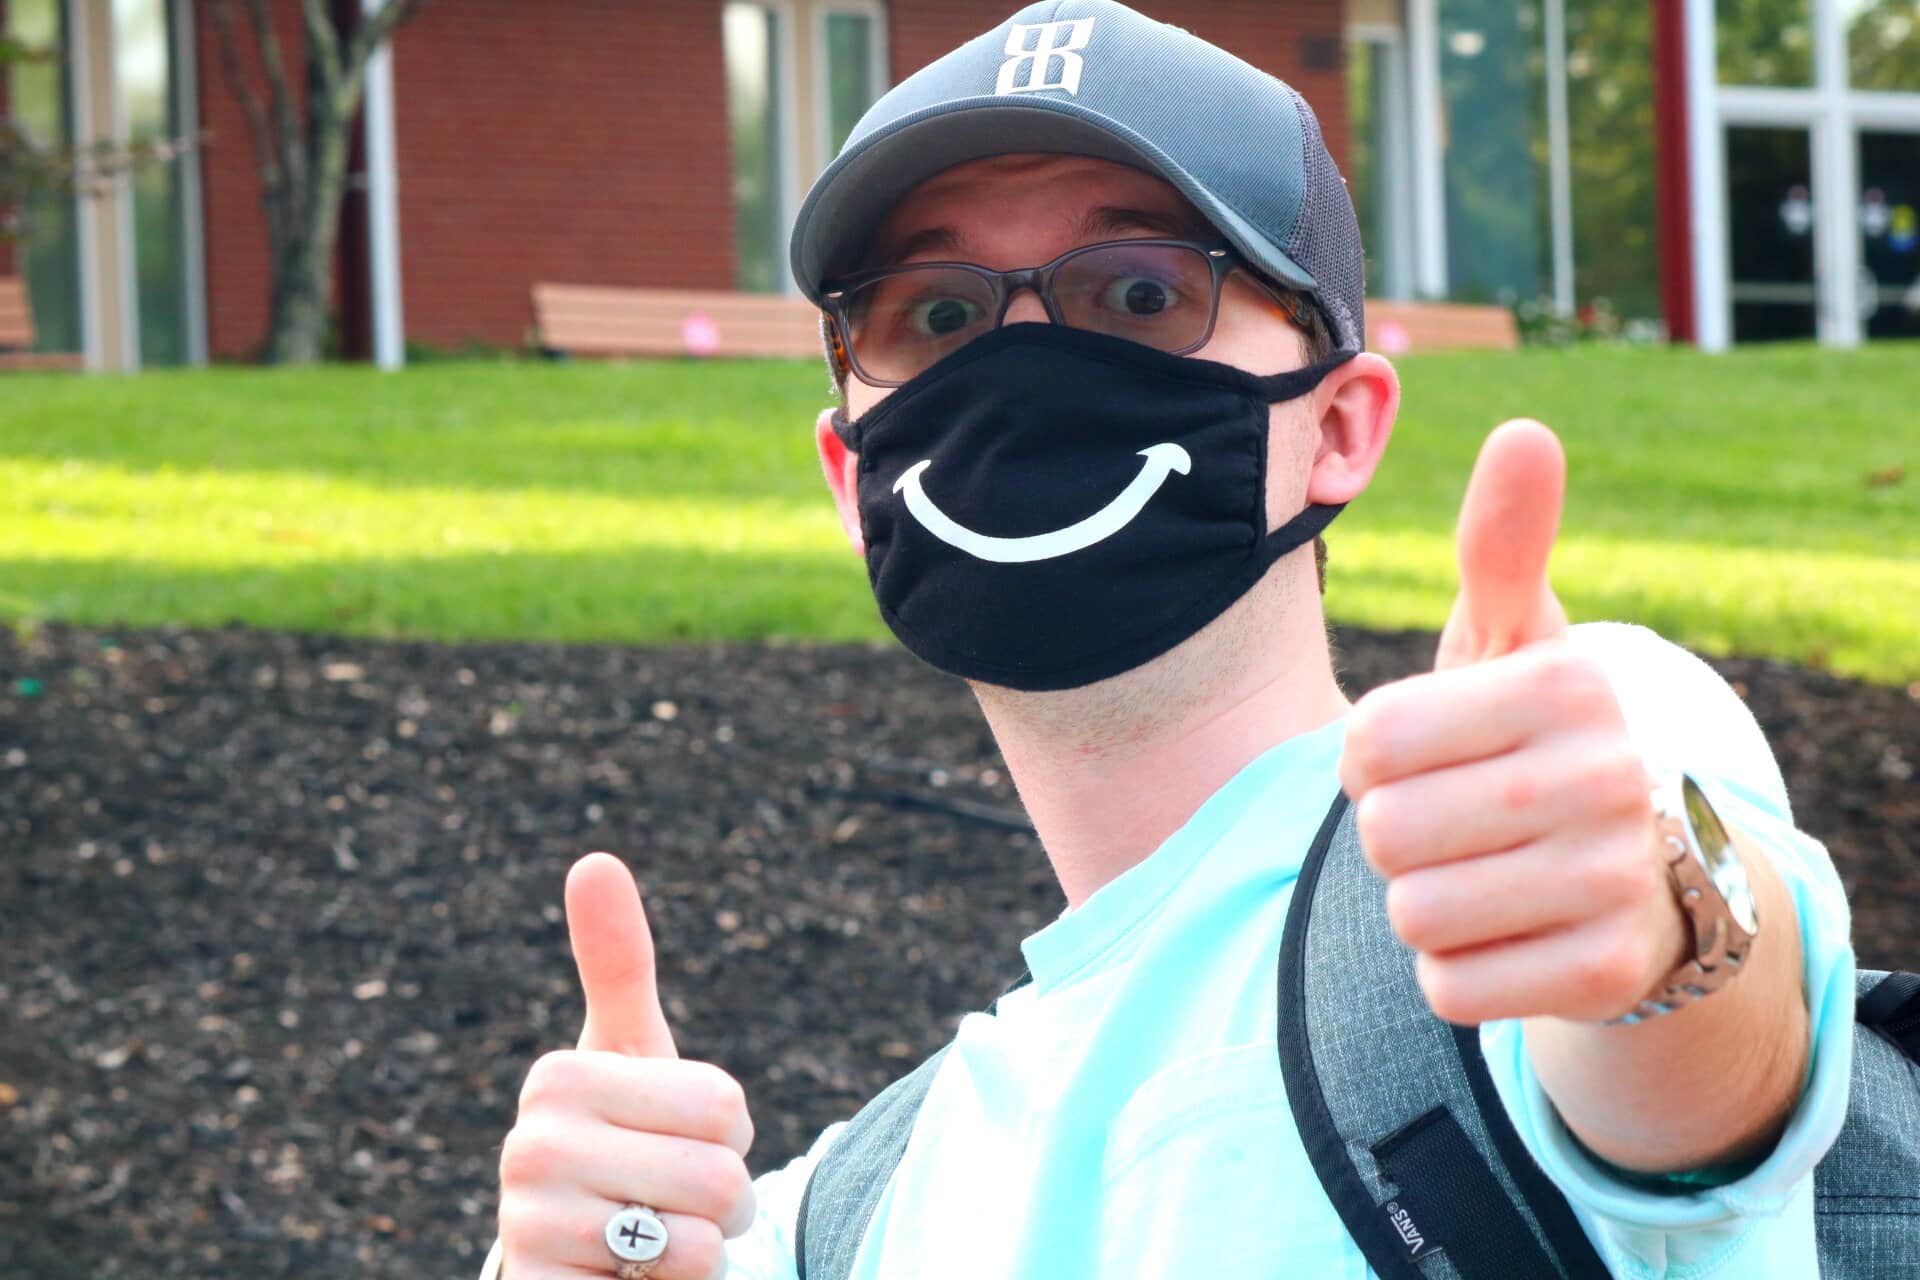 Austin Hughes, junior, is a Broadcast Media major who enthusiastically wears his mask when turned upright.